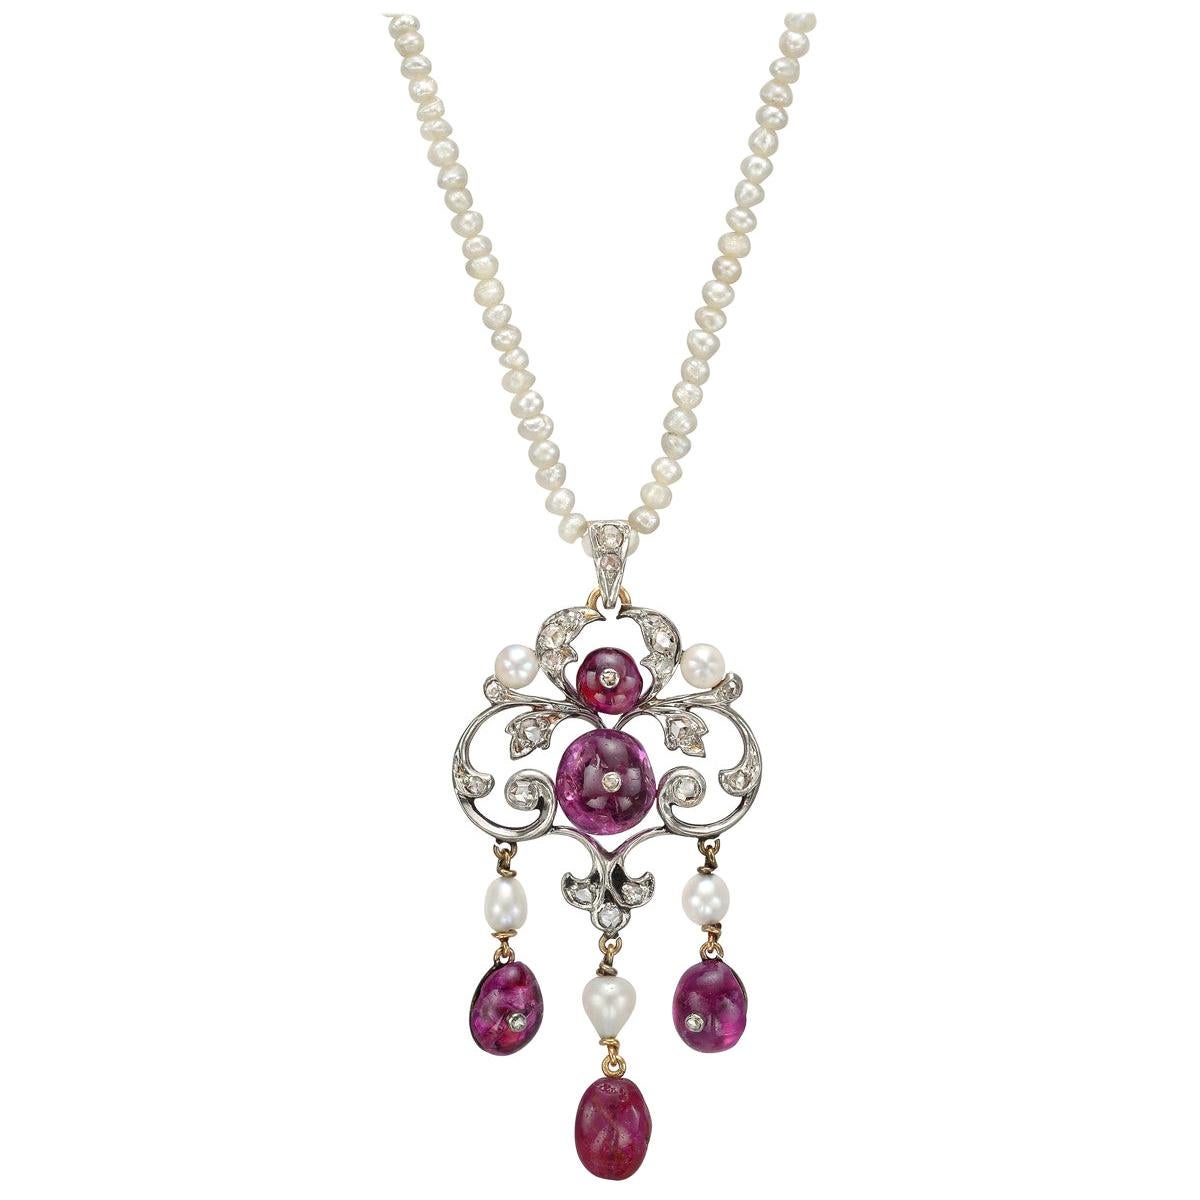 Antique Natural Pearl and Ruby Pendant Necklace